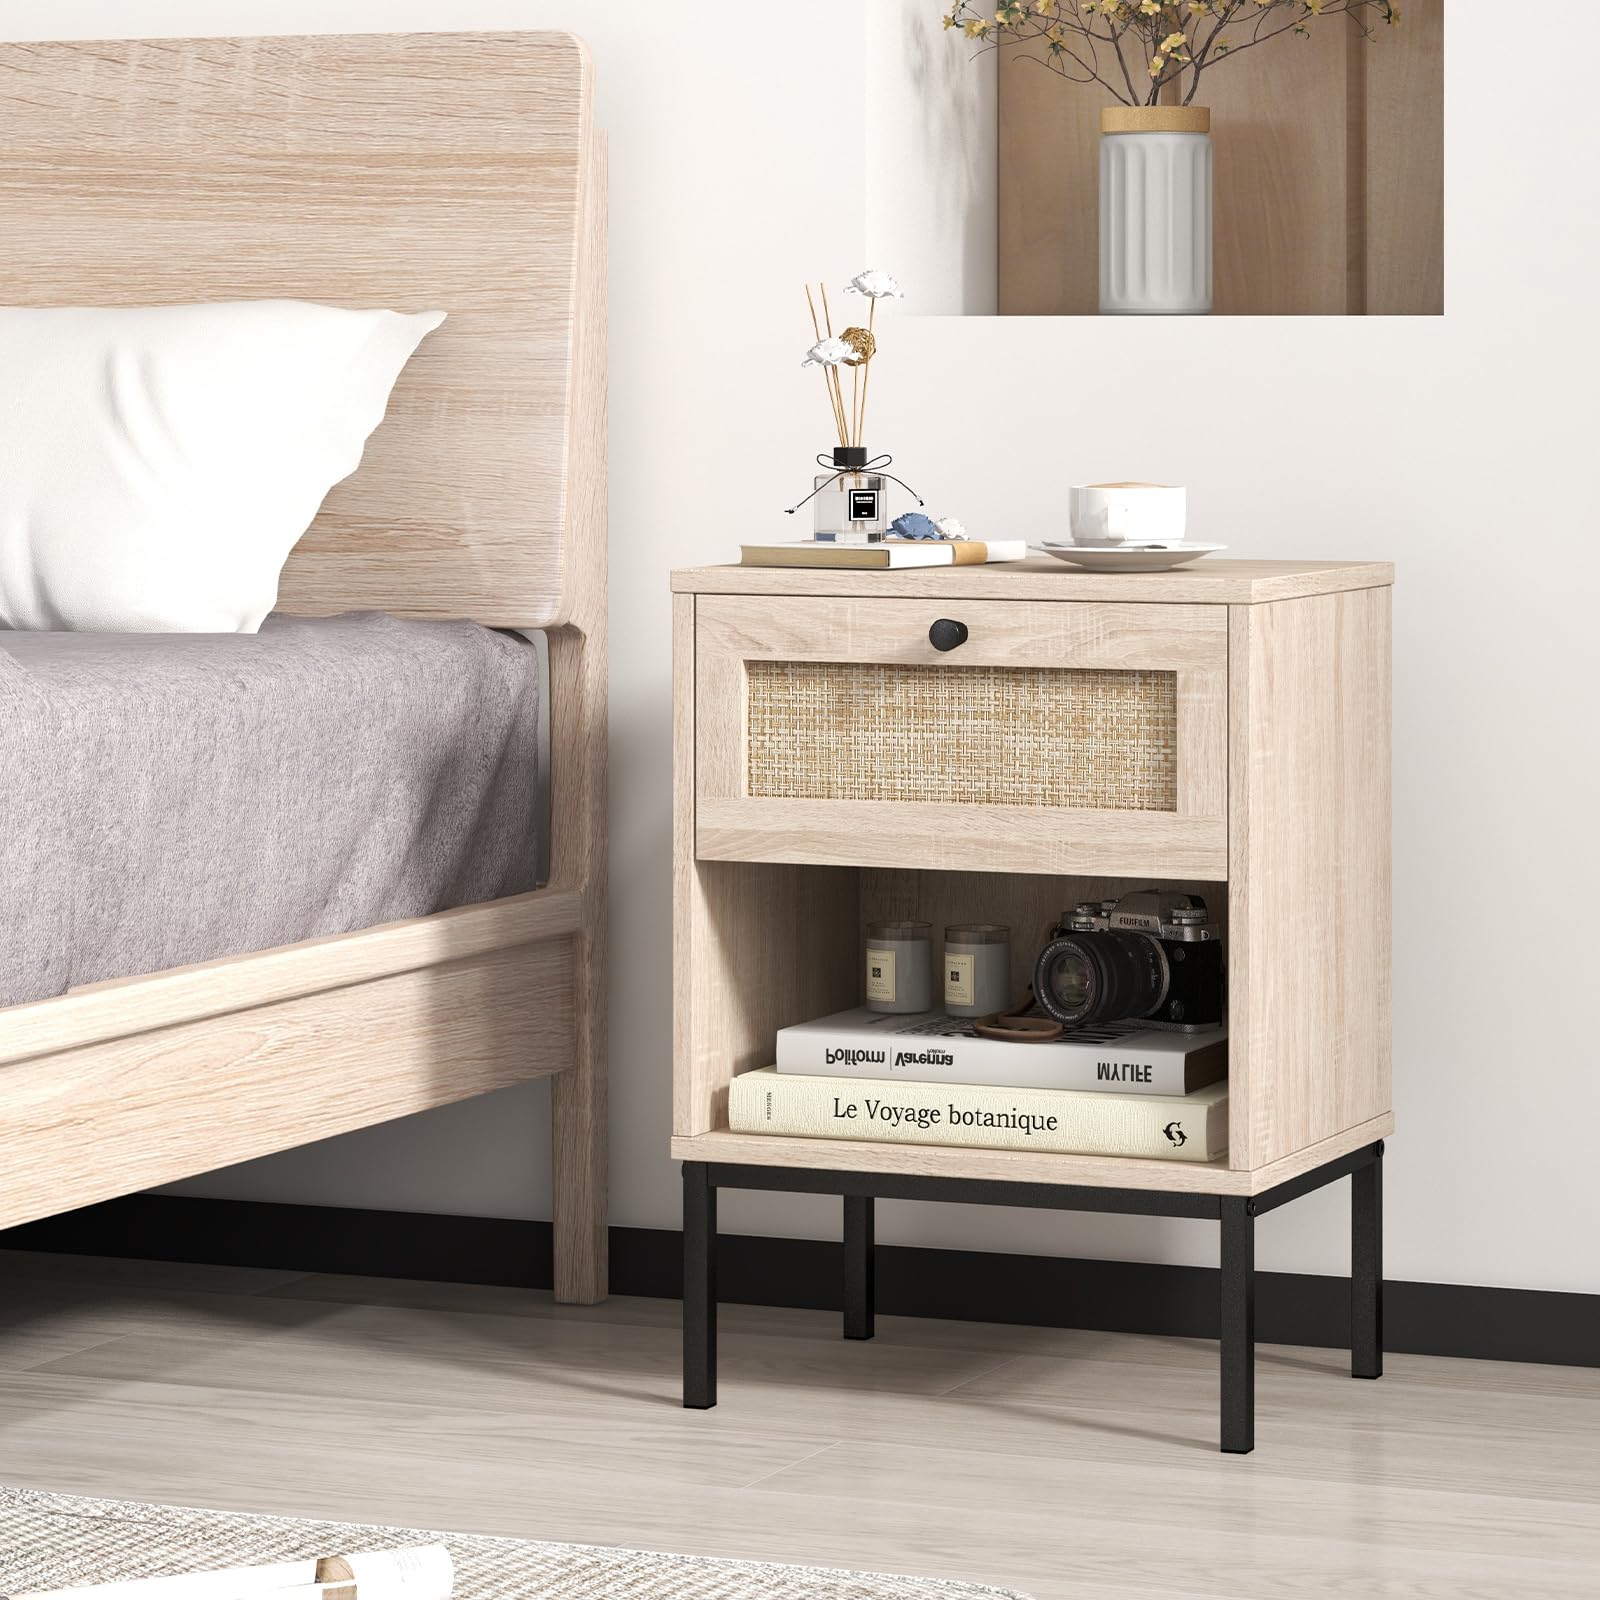 Giantex Rattan Nightstand with Drawer, Boho Side Table with 4 Metal Legs and Open Storage Shelf